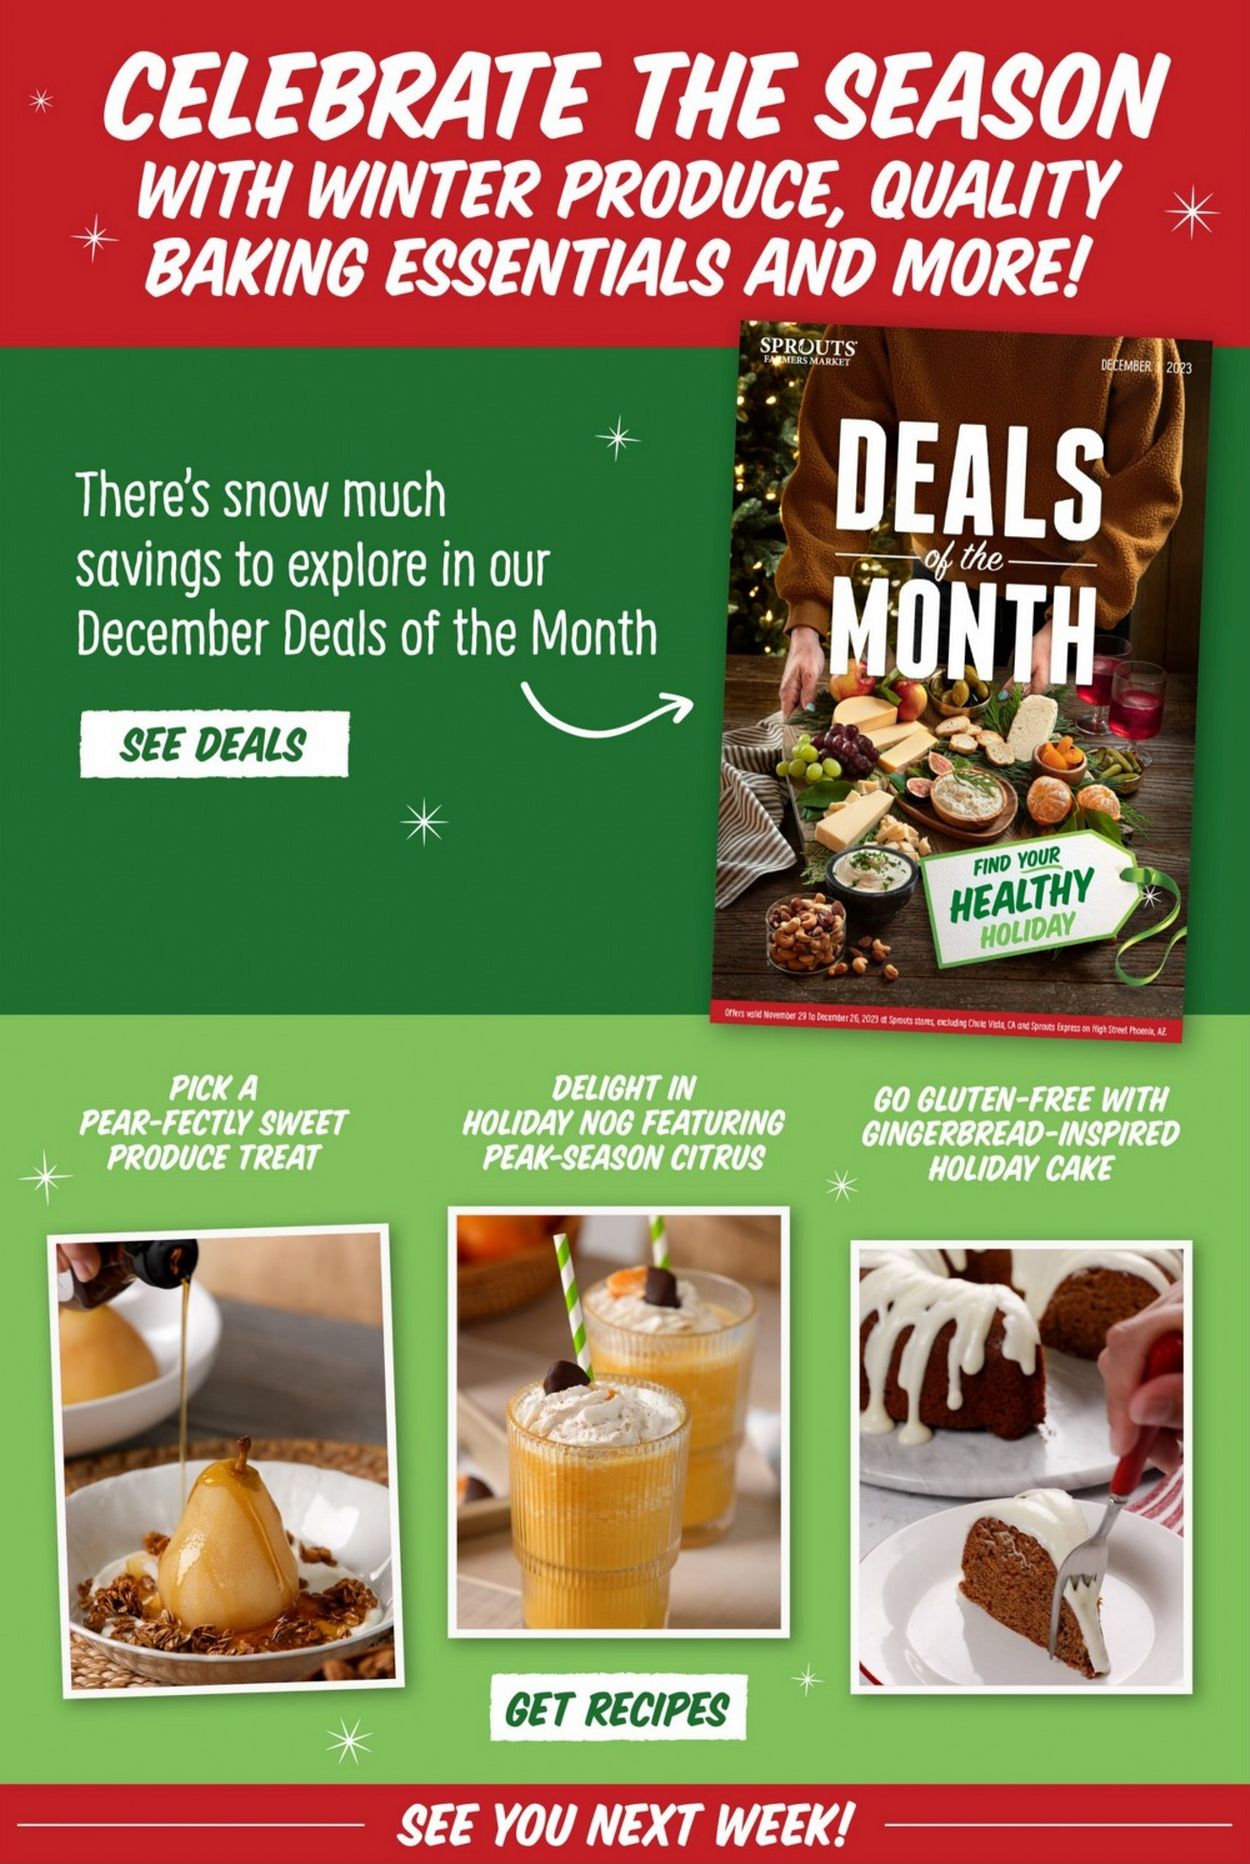 Sprouts Christmas July 2024 Weekly Sales, Deals, Discounts and Digital Coupons.